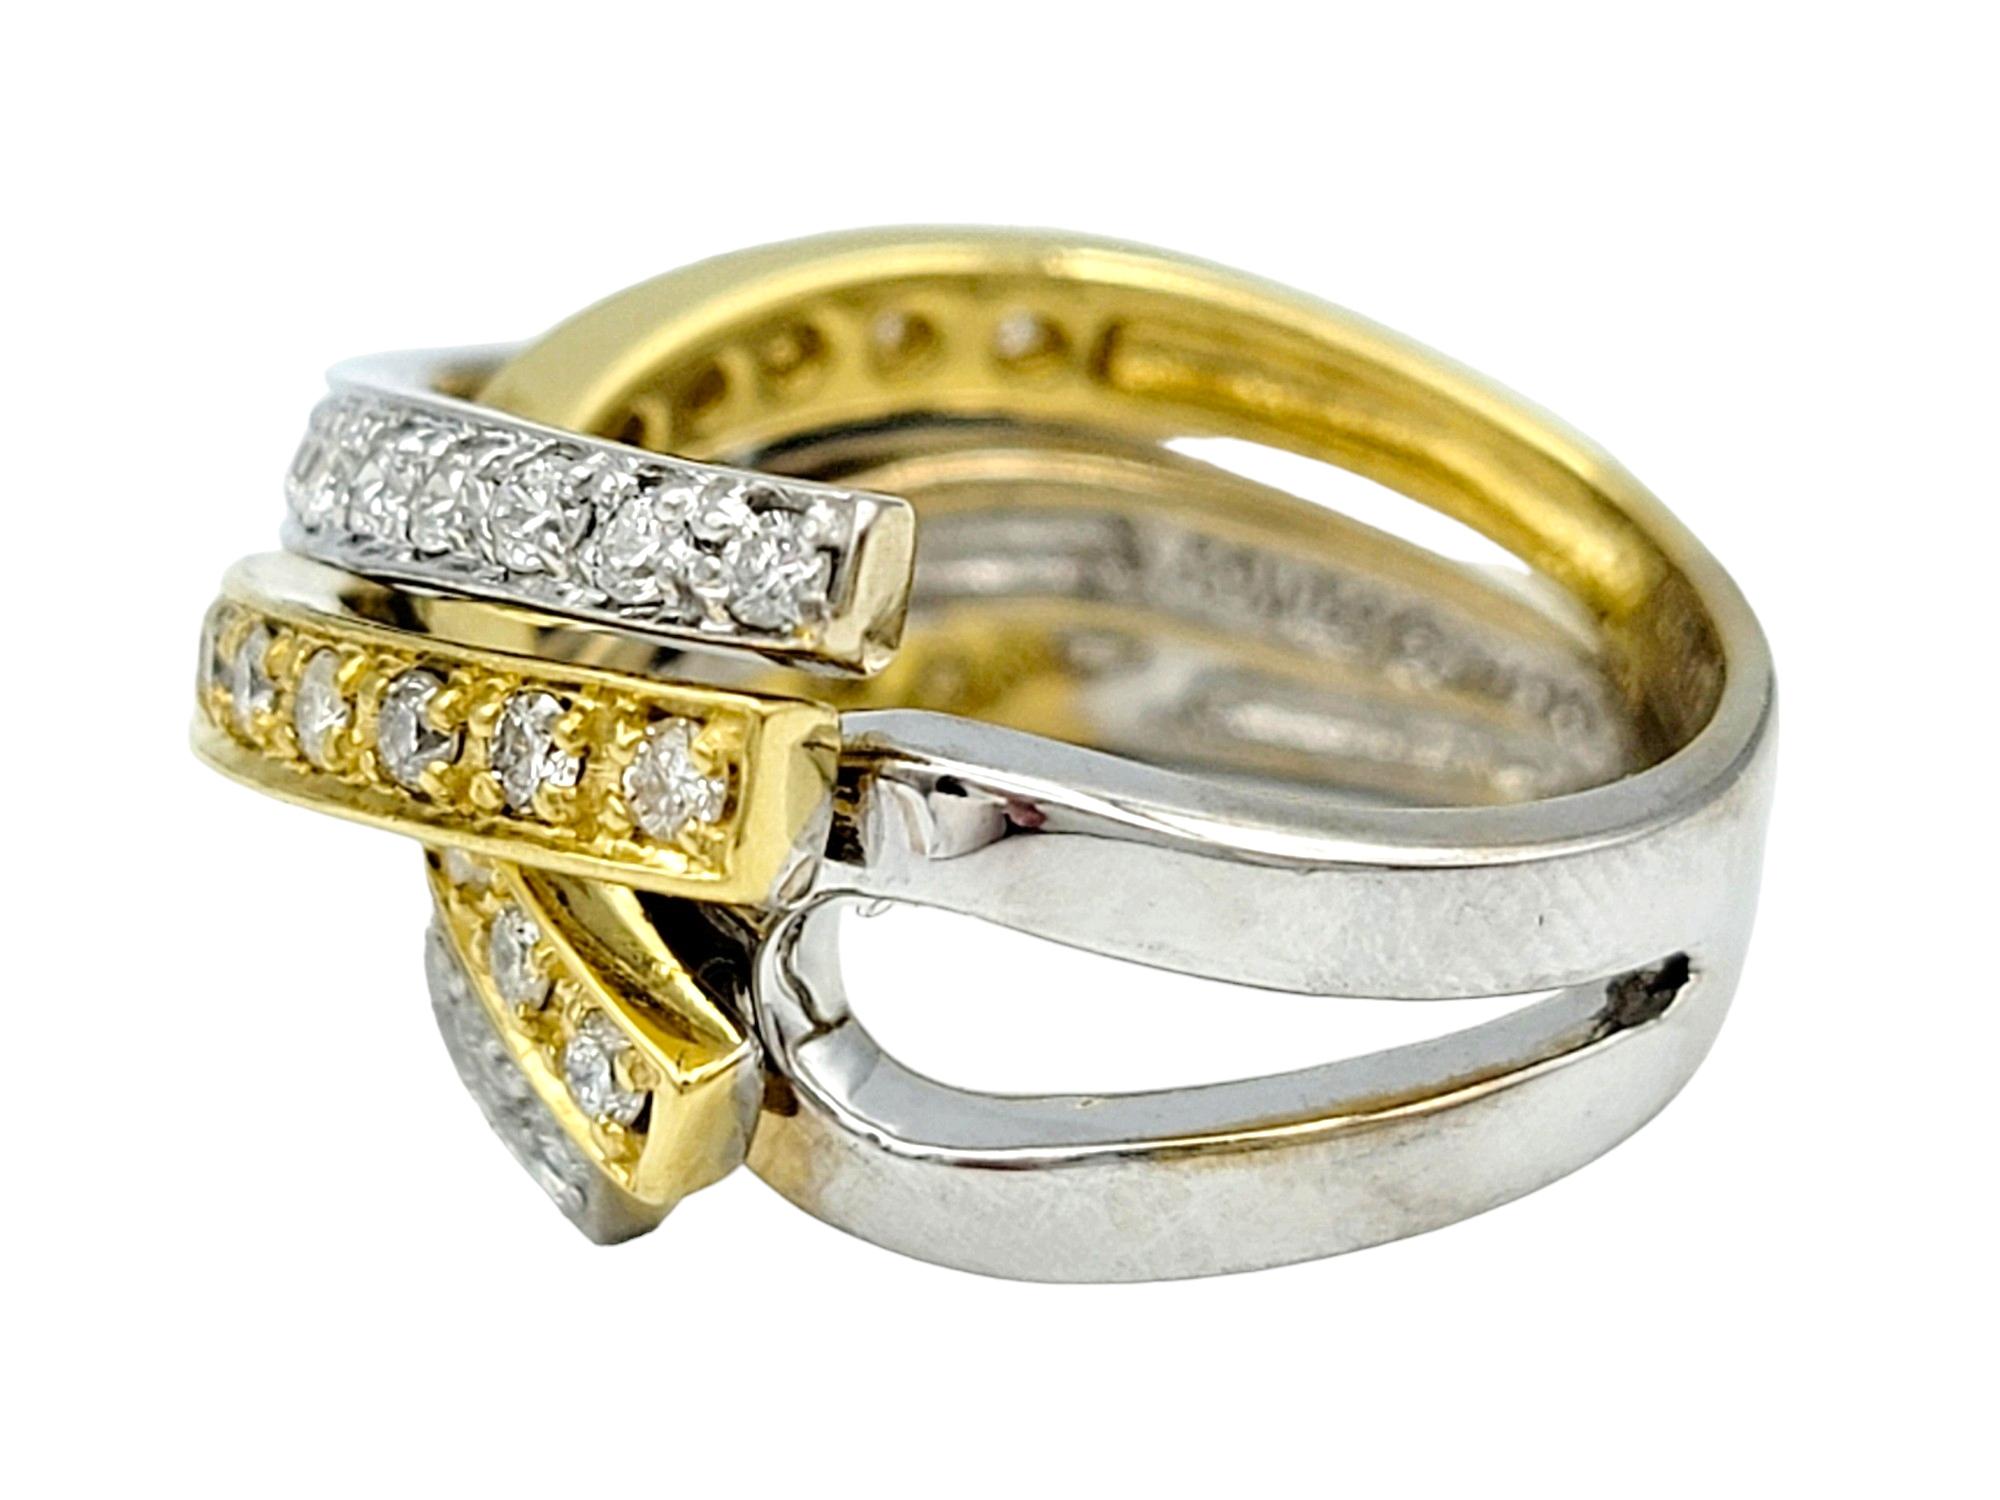 Sonia B. Multi Row Criss-Cross Diamond Band Ring Set in Two-Toned 18 Karat Gold In Good Condition For Sale In Scottsdale, AZ